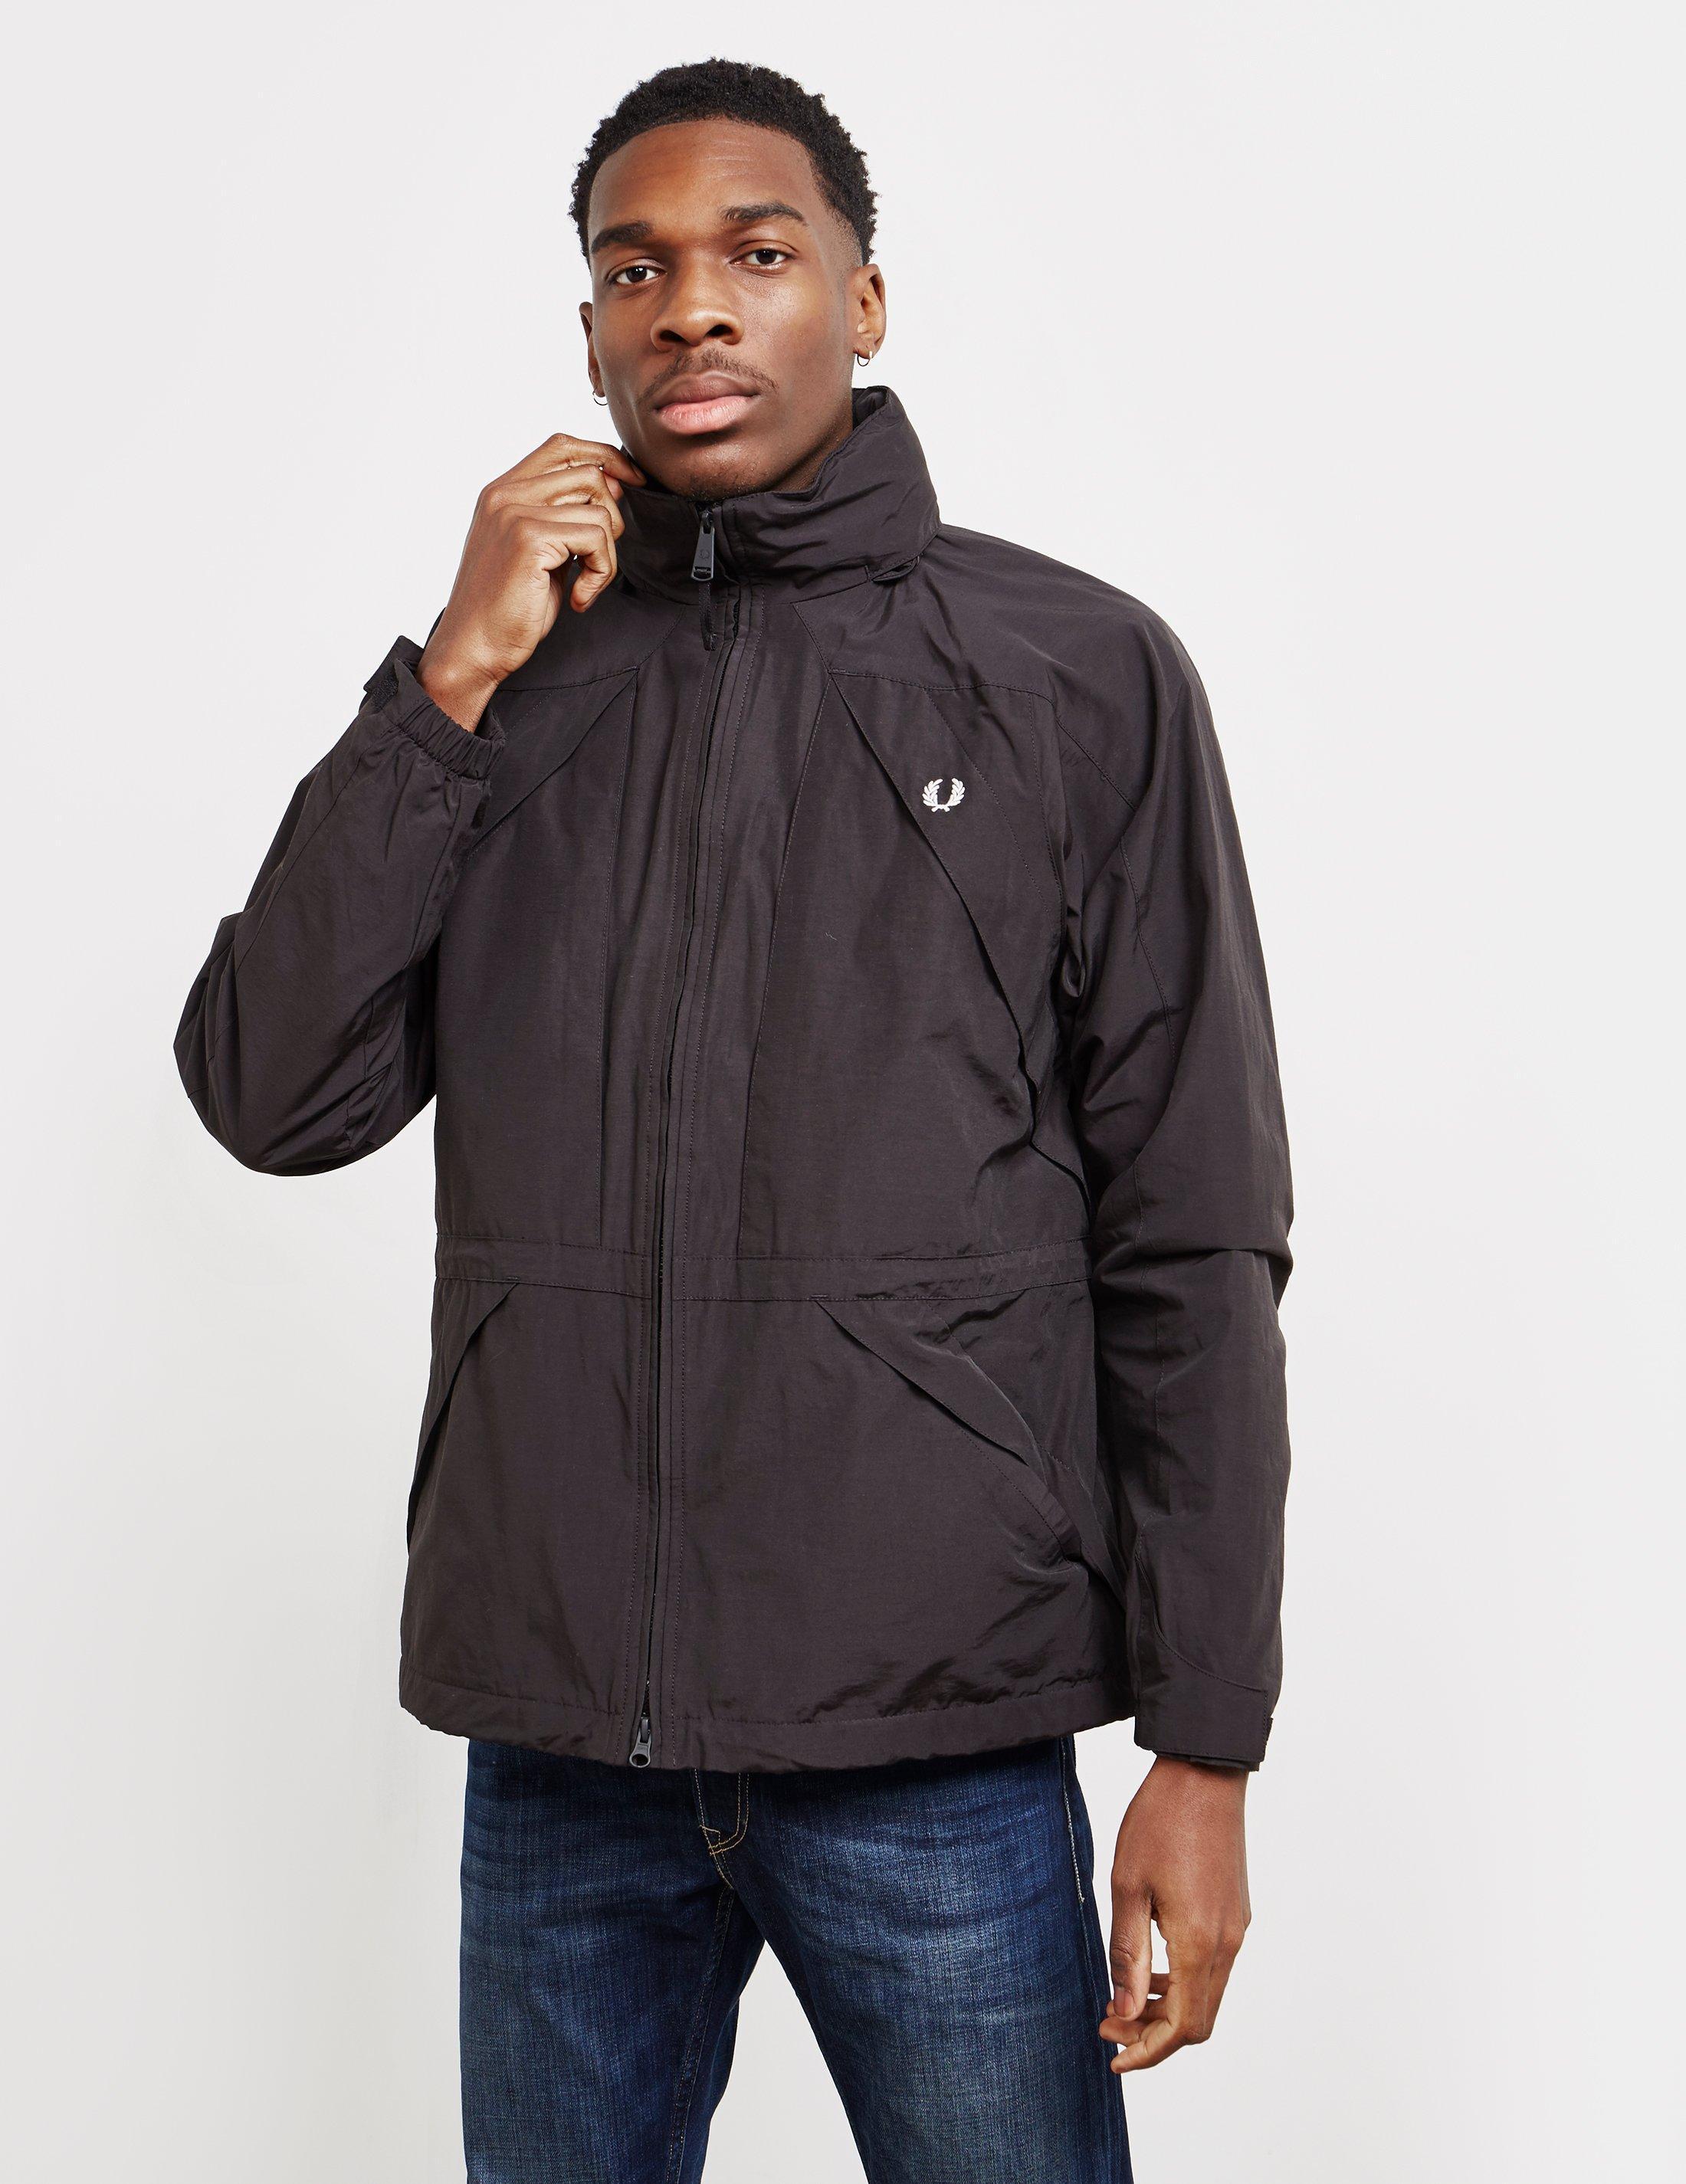 Fred Perry Cotton Offshore Lightweight Jacket Black for Men - Lyst